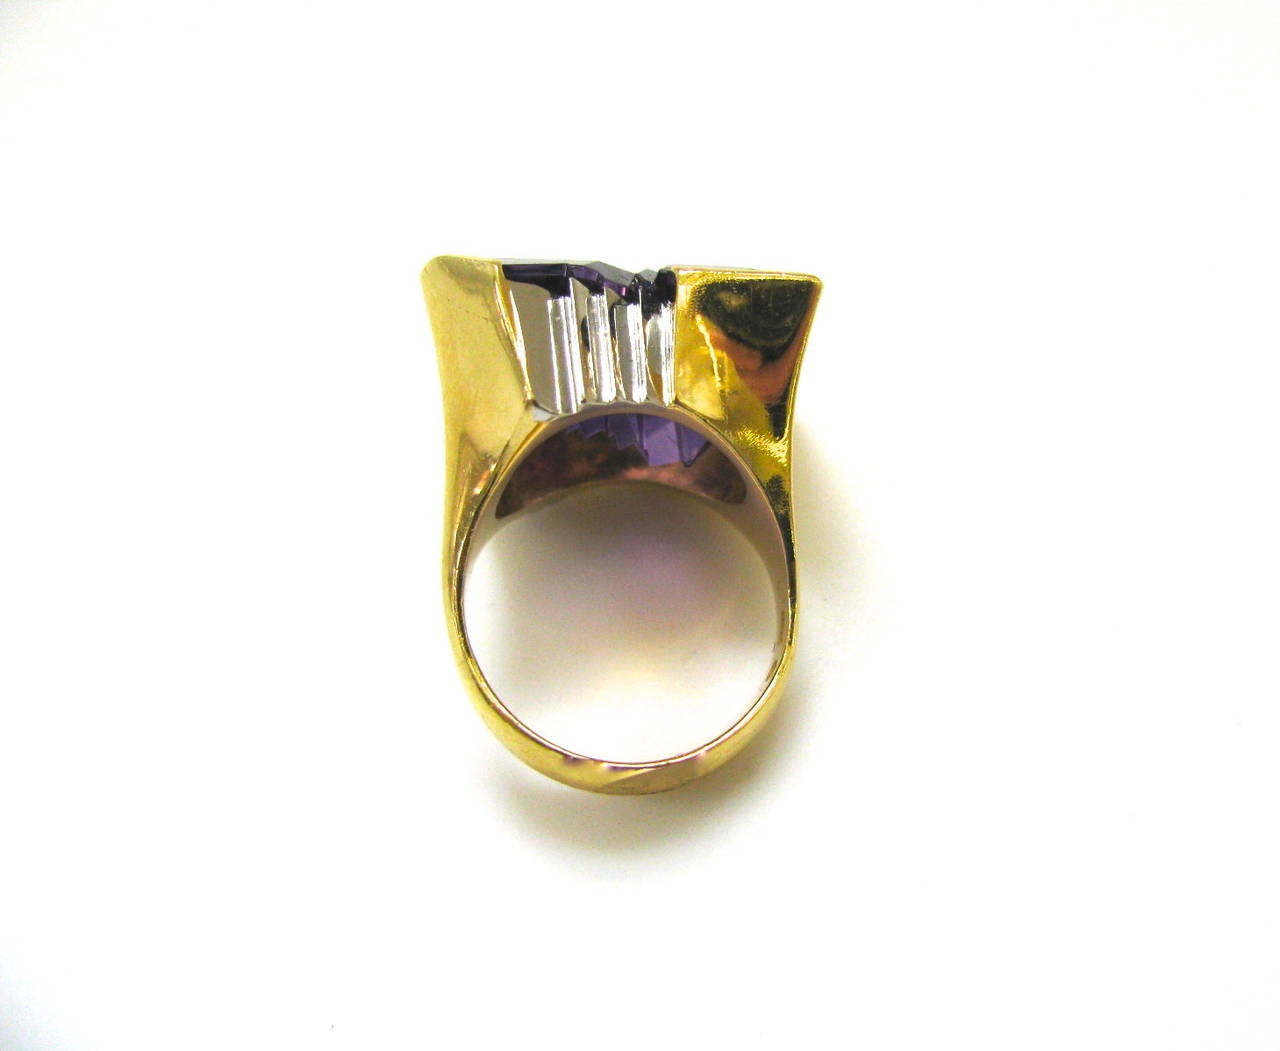 A pretty amethyst and gold ring by Atelier Munsteiner. The 7/8